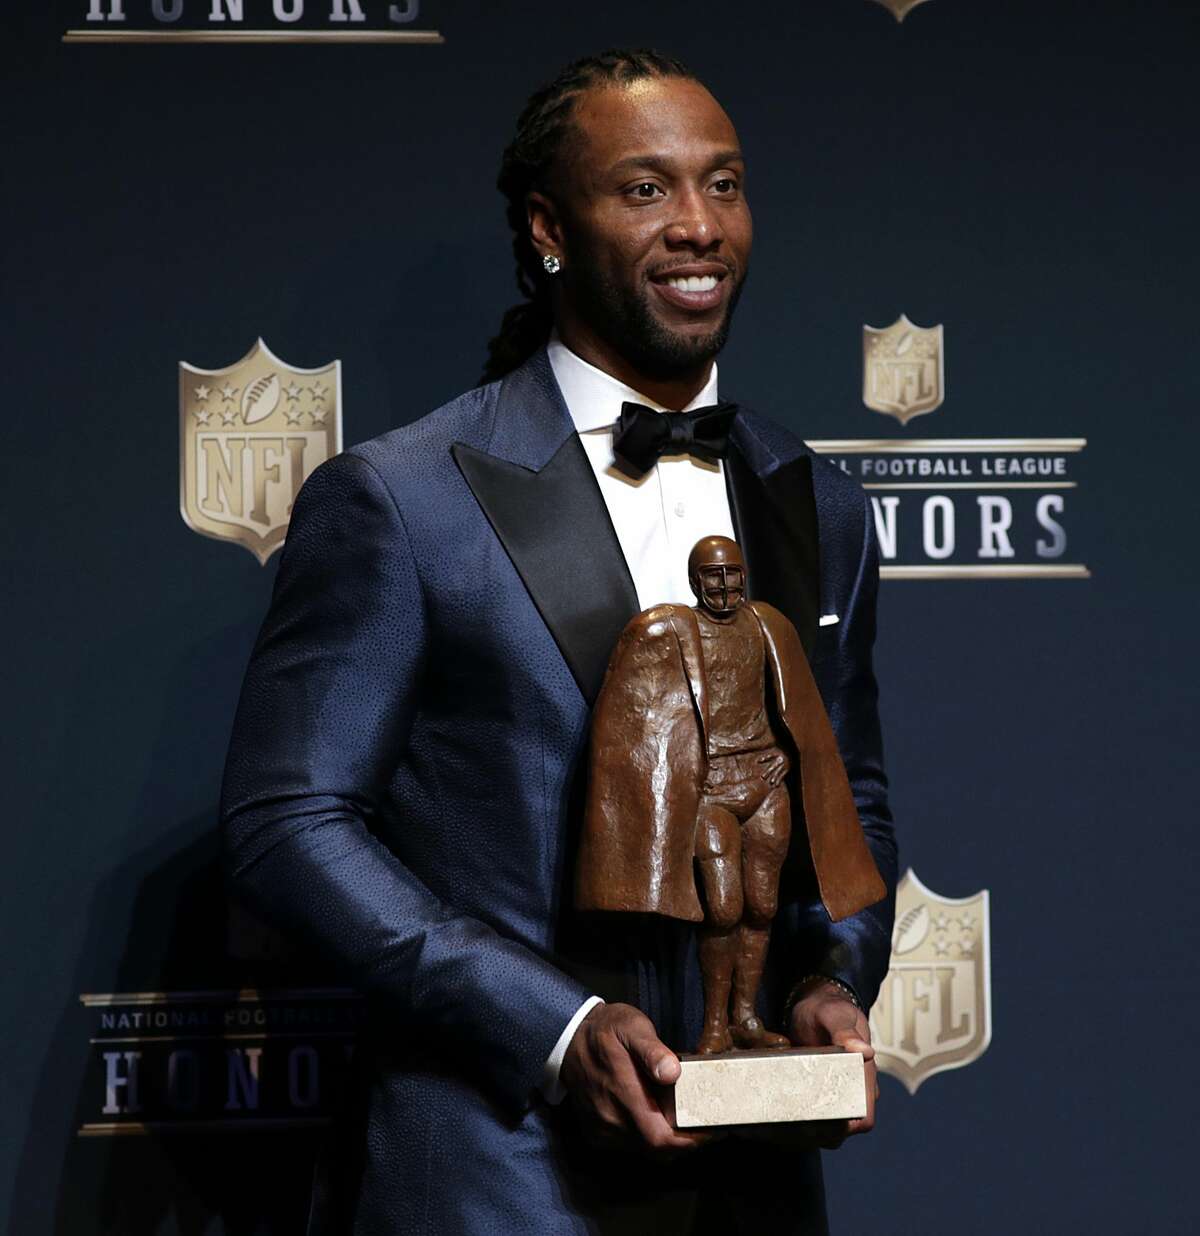 Walter Payton NFL Man of the Year co-winner Larry Fitzgerald during the NFL Honors media availability at the Wortham Center Saturday, Feb. 4, 2017, in Houston. ( James Nielsen / Houston Chronicle )